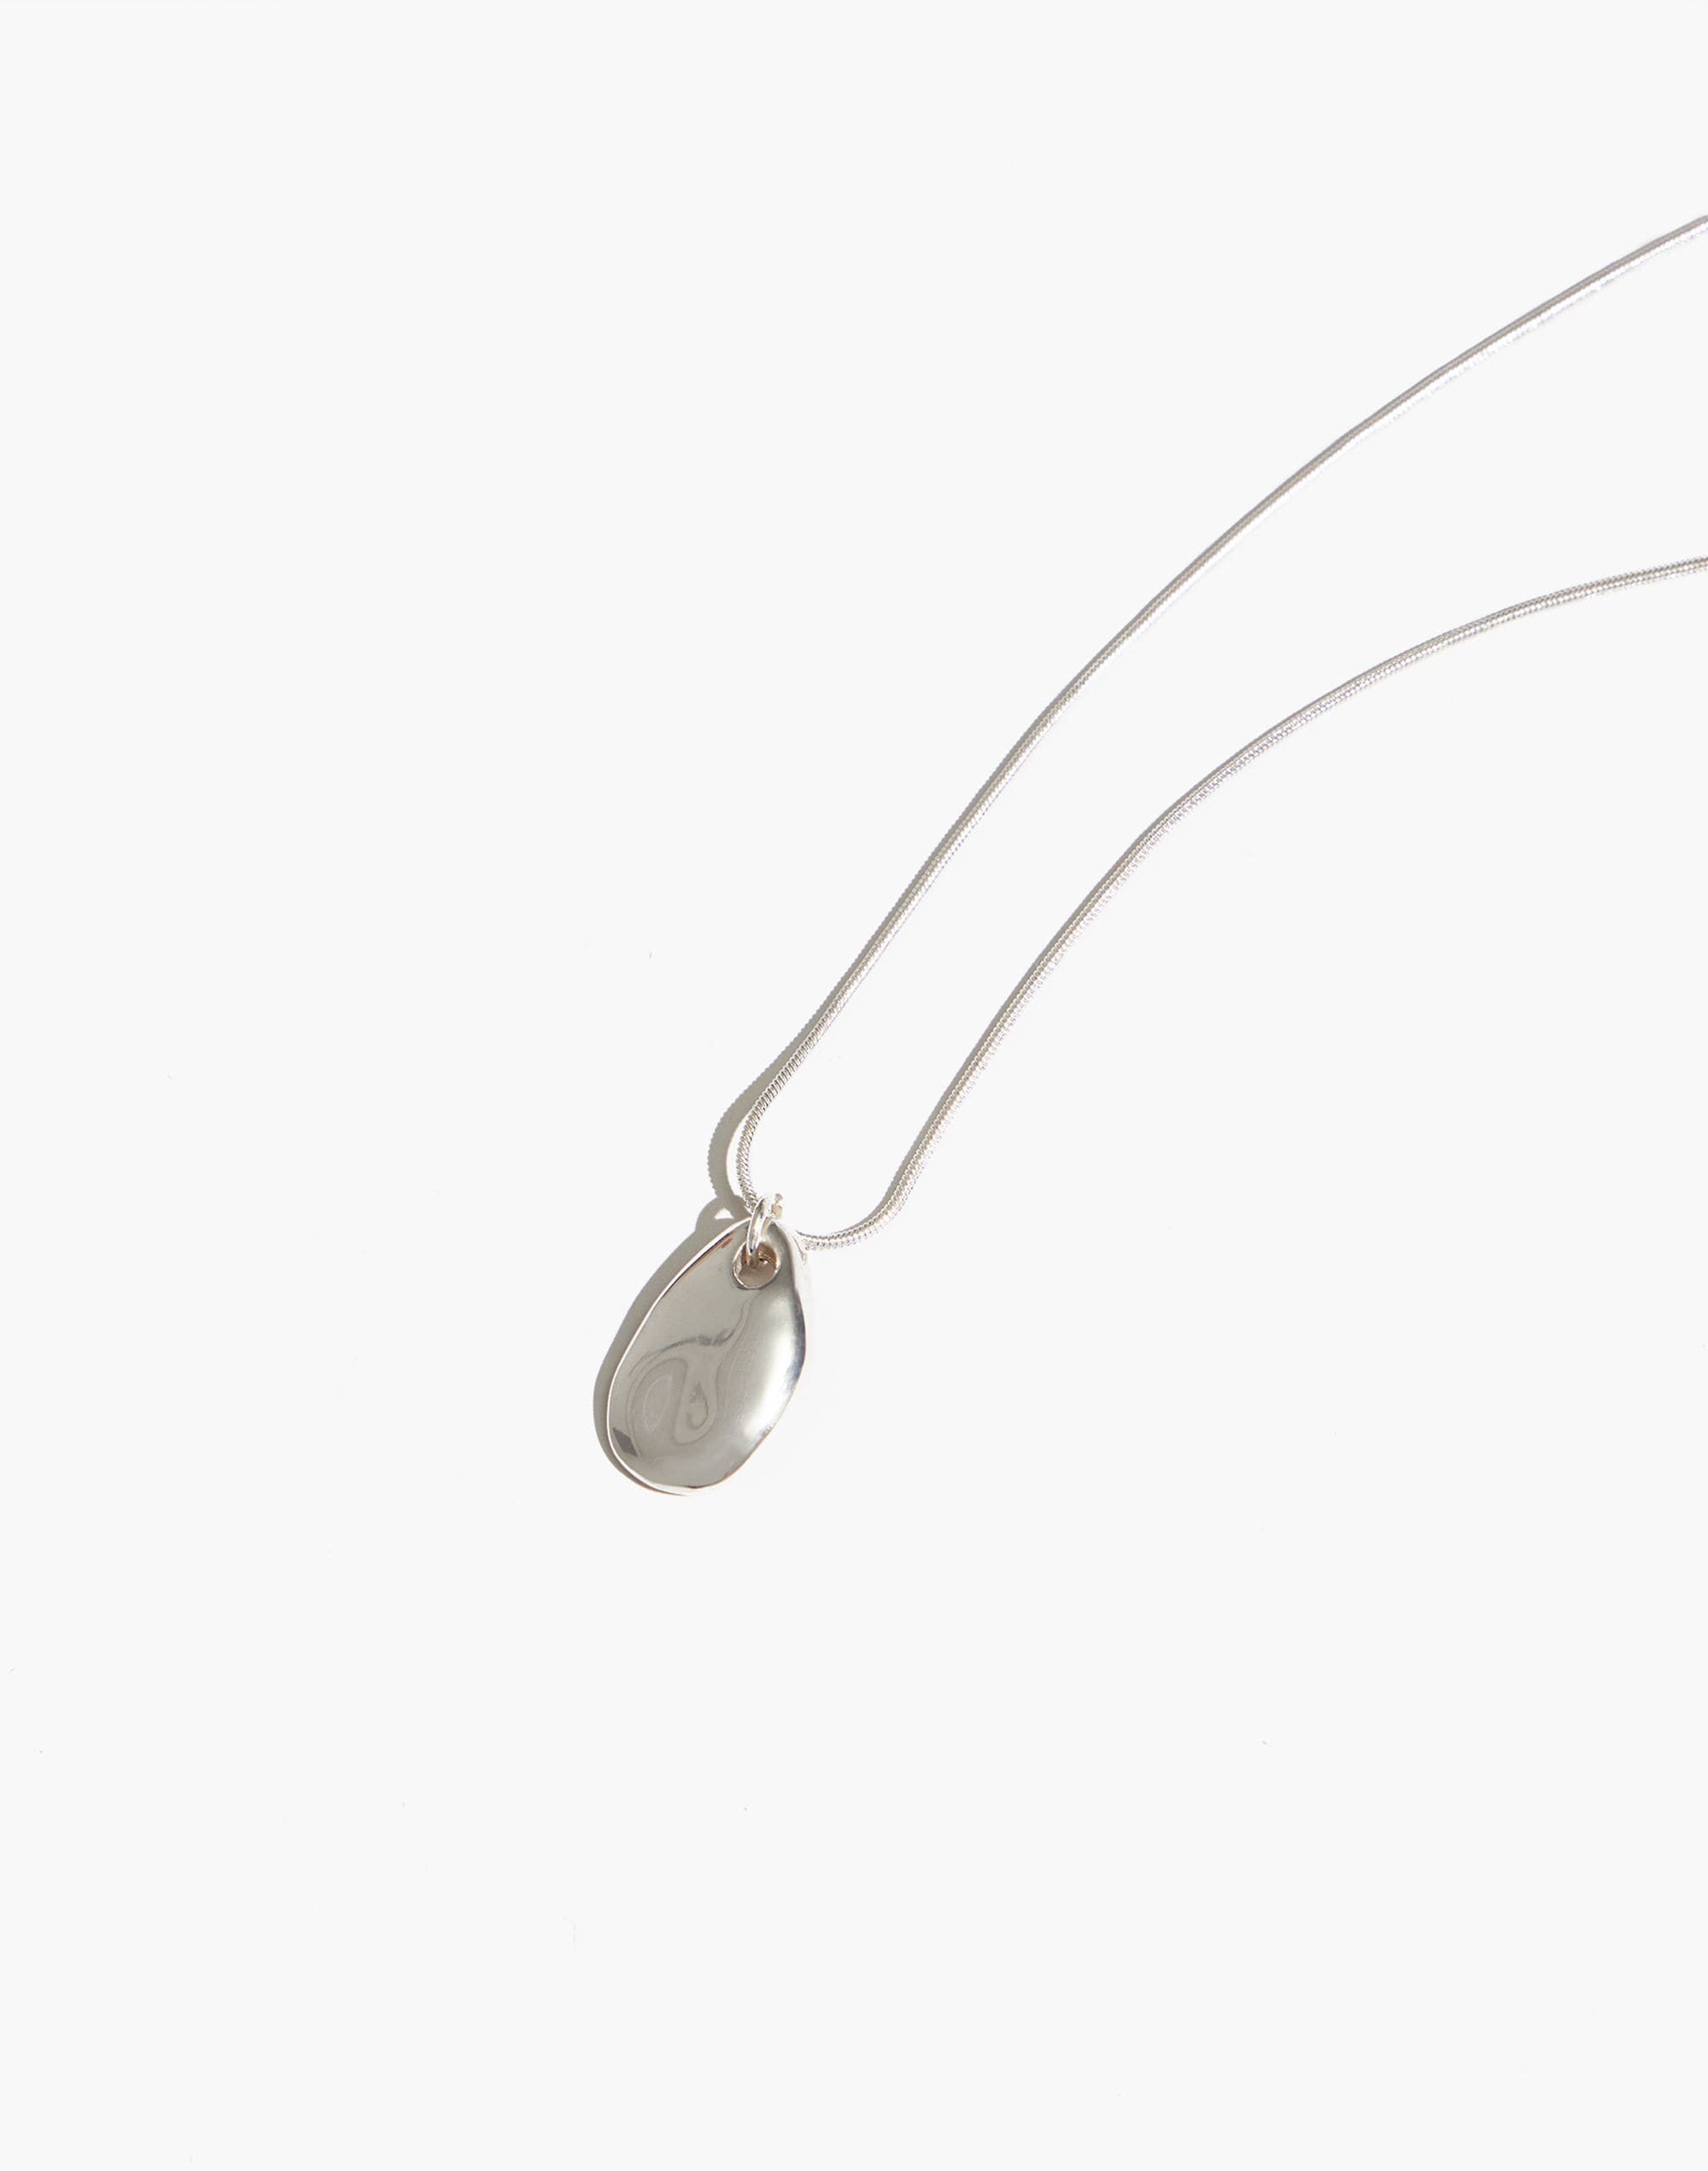 Maslo Jewelry Small Pebble Pendant Necklace Sterling Silver Chain